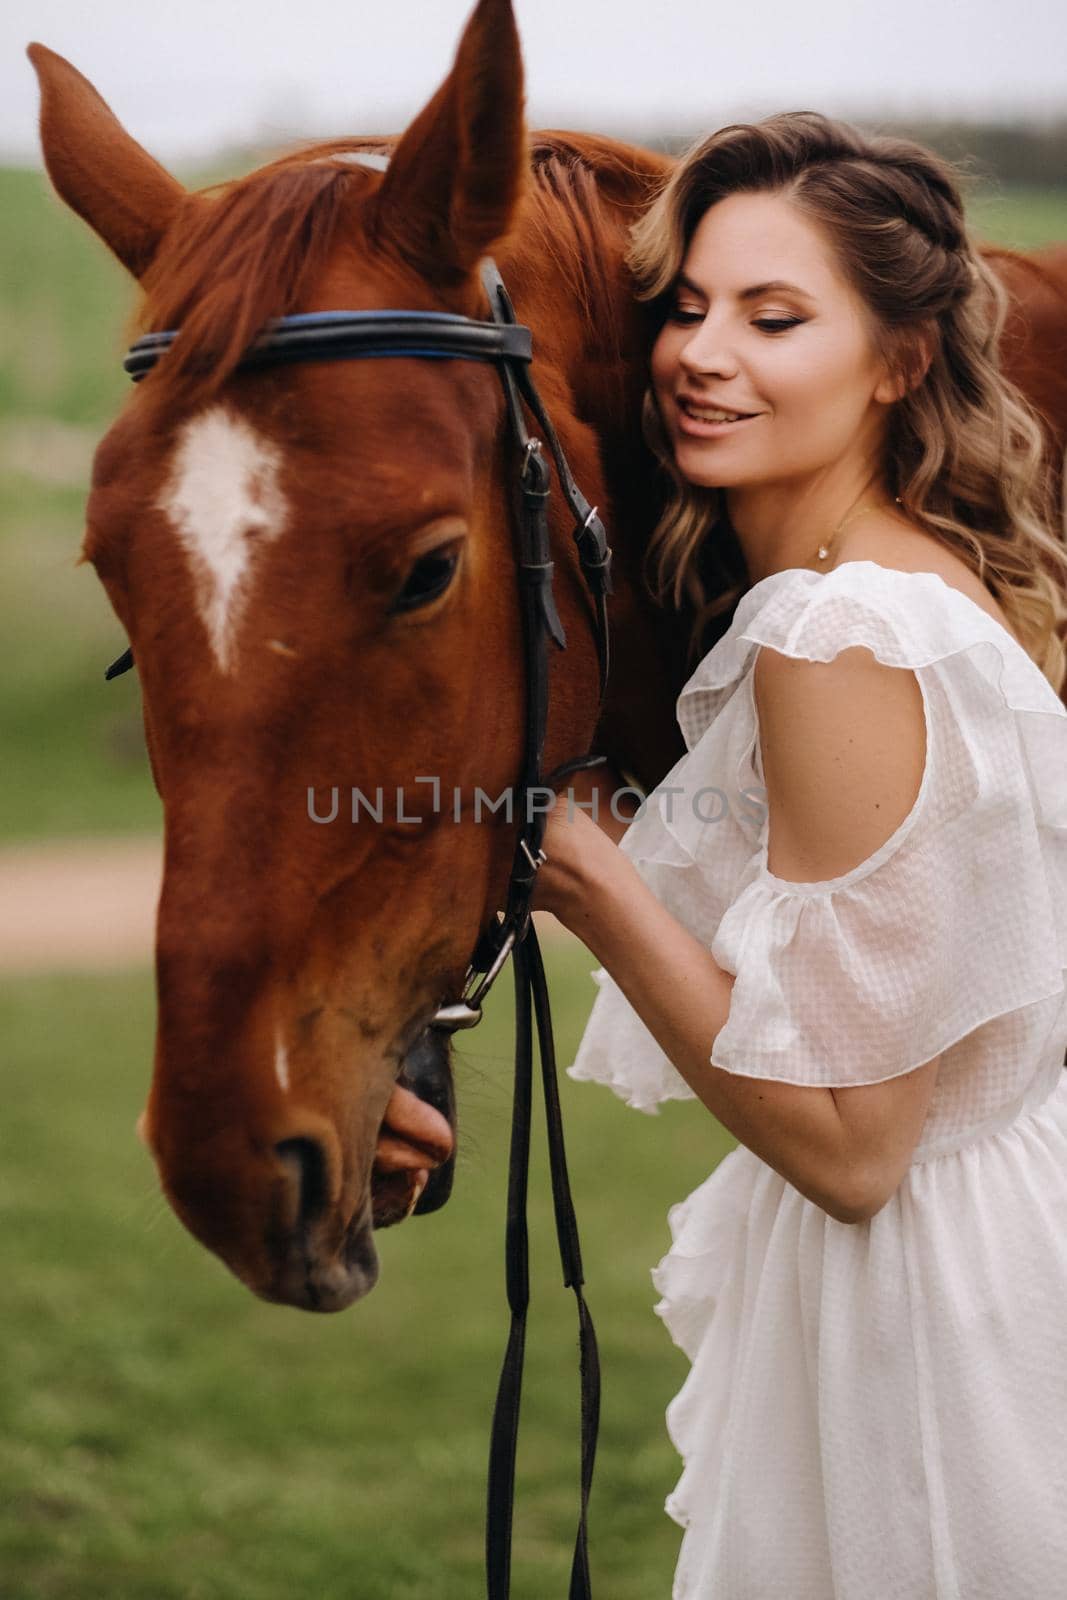 A girl in a white sundress stands next to a brown horse in a field in summer by Lobachad